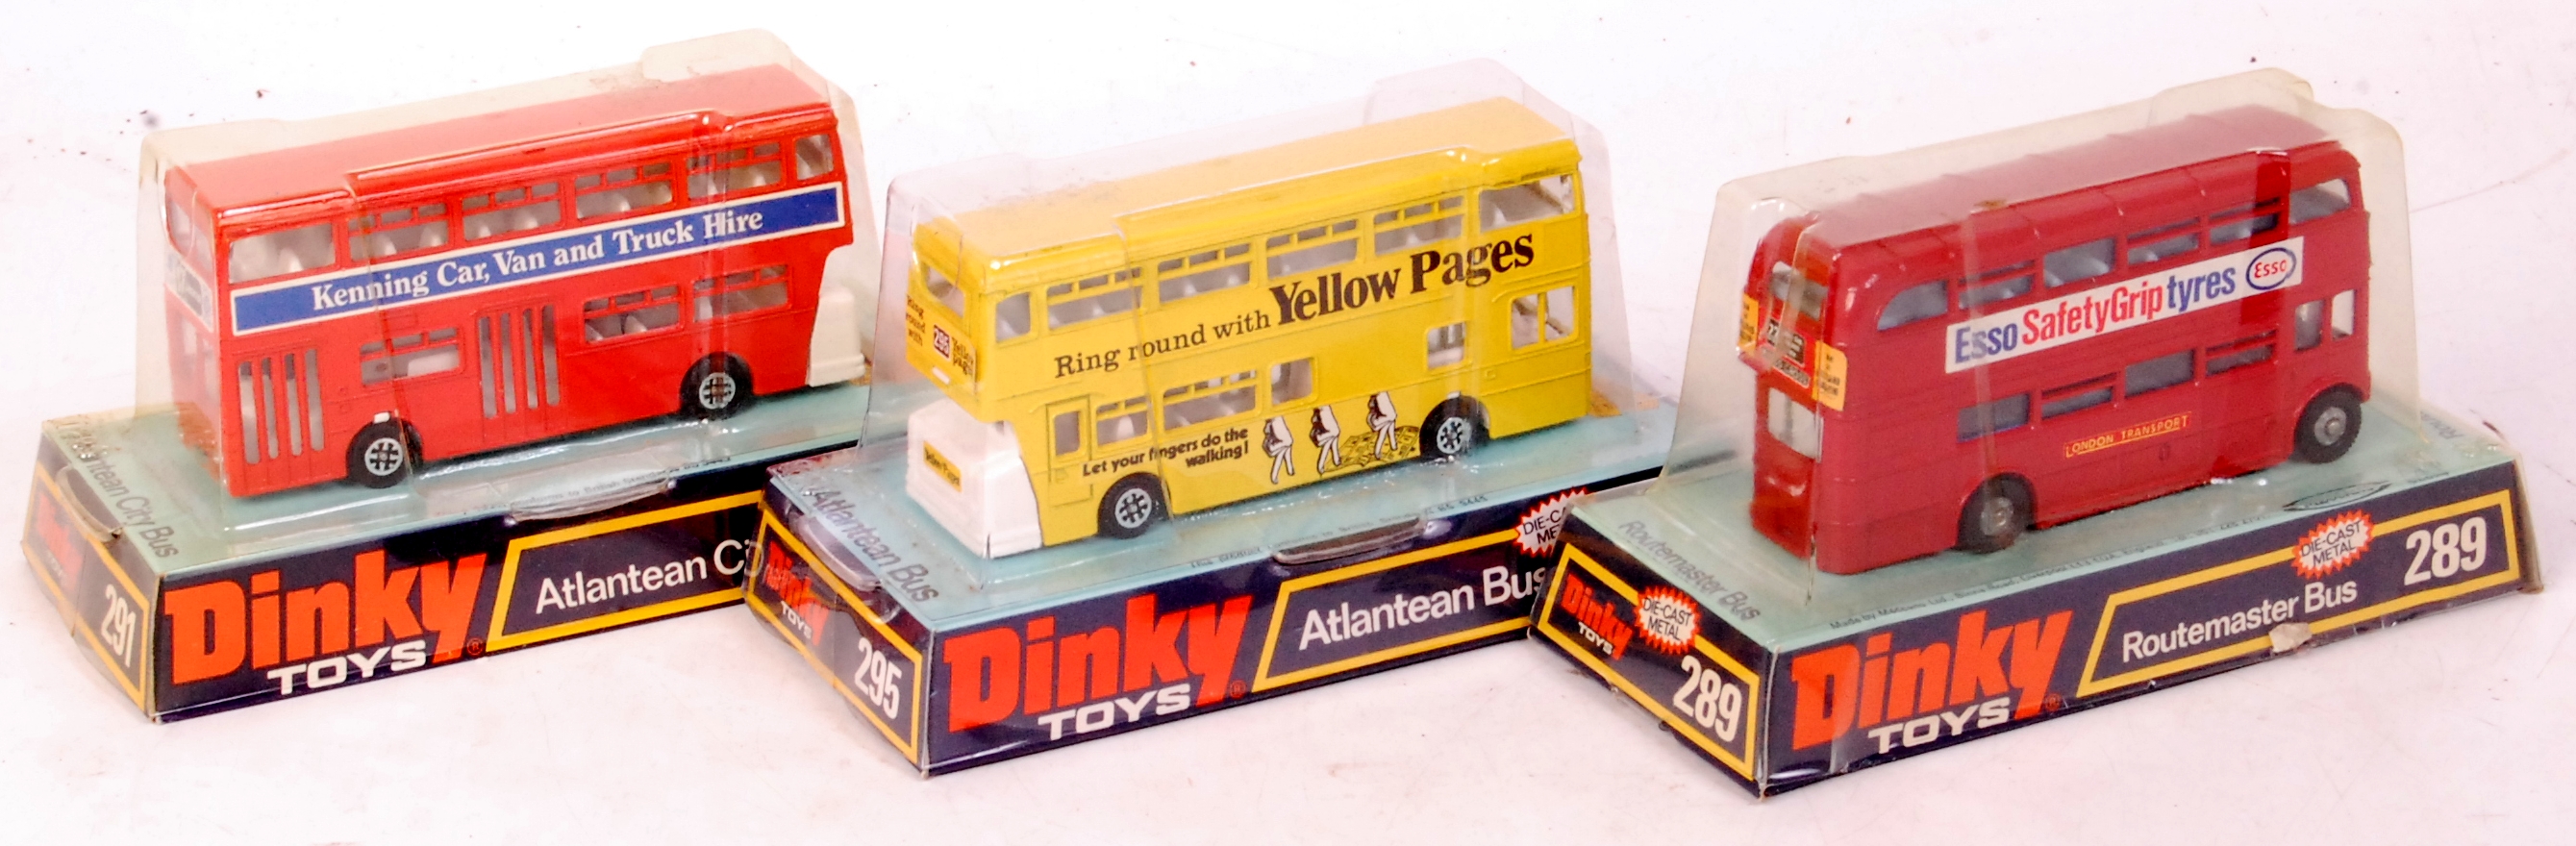 Dinky Toys, bubble-packed public transpo